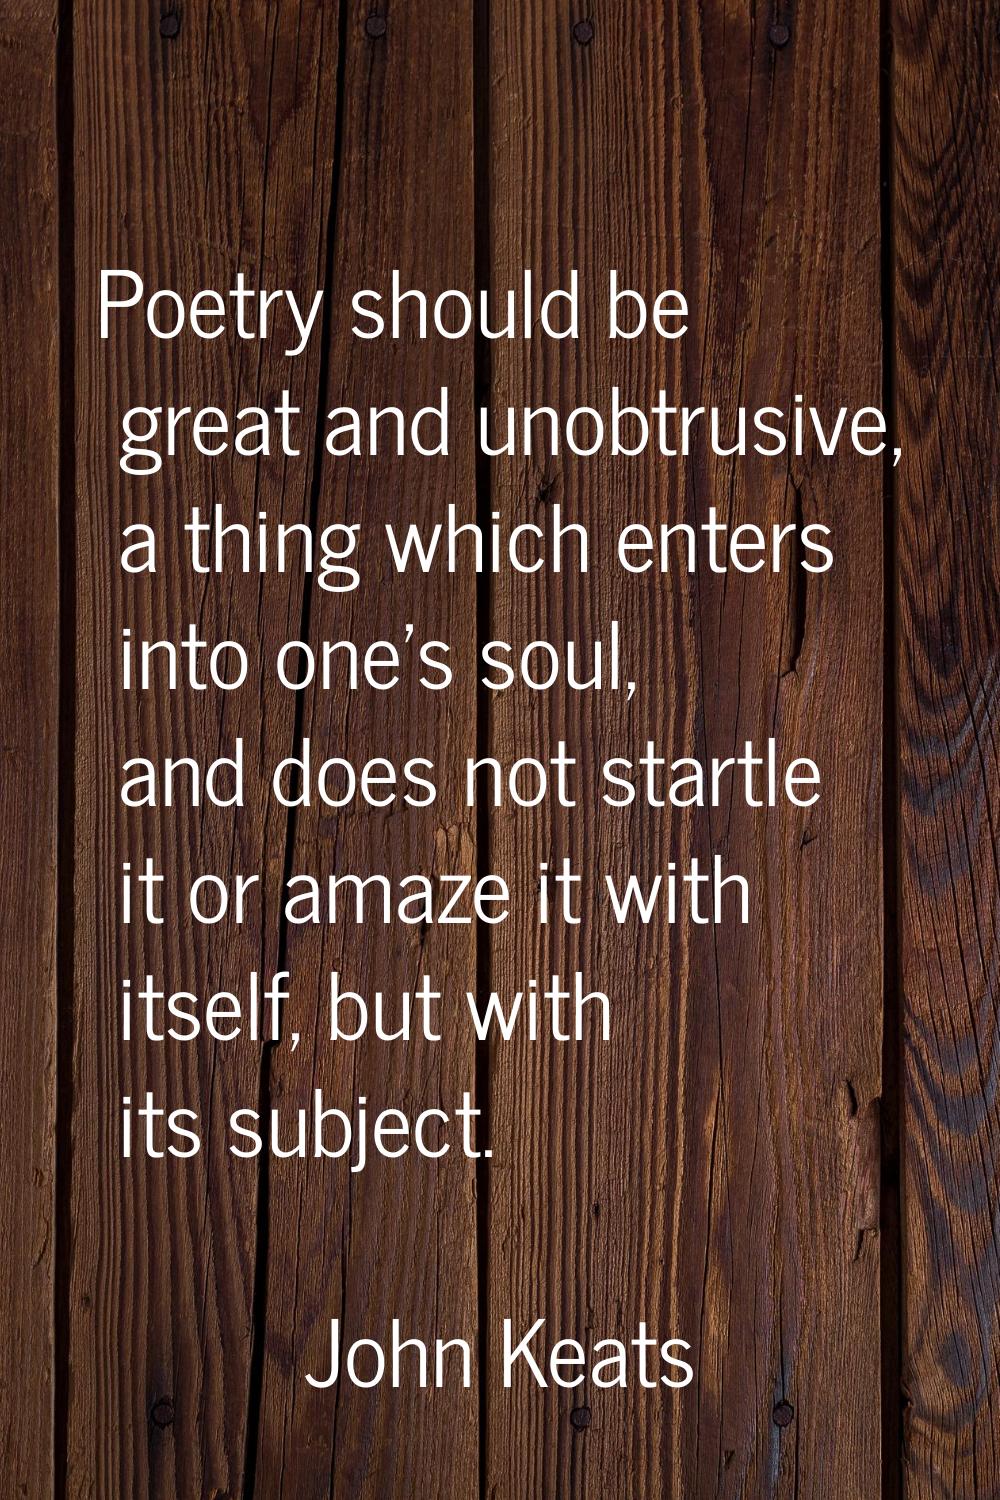 Poetry should be great and unobtrusive, a thing which enters into one's soul, and does not startle 